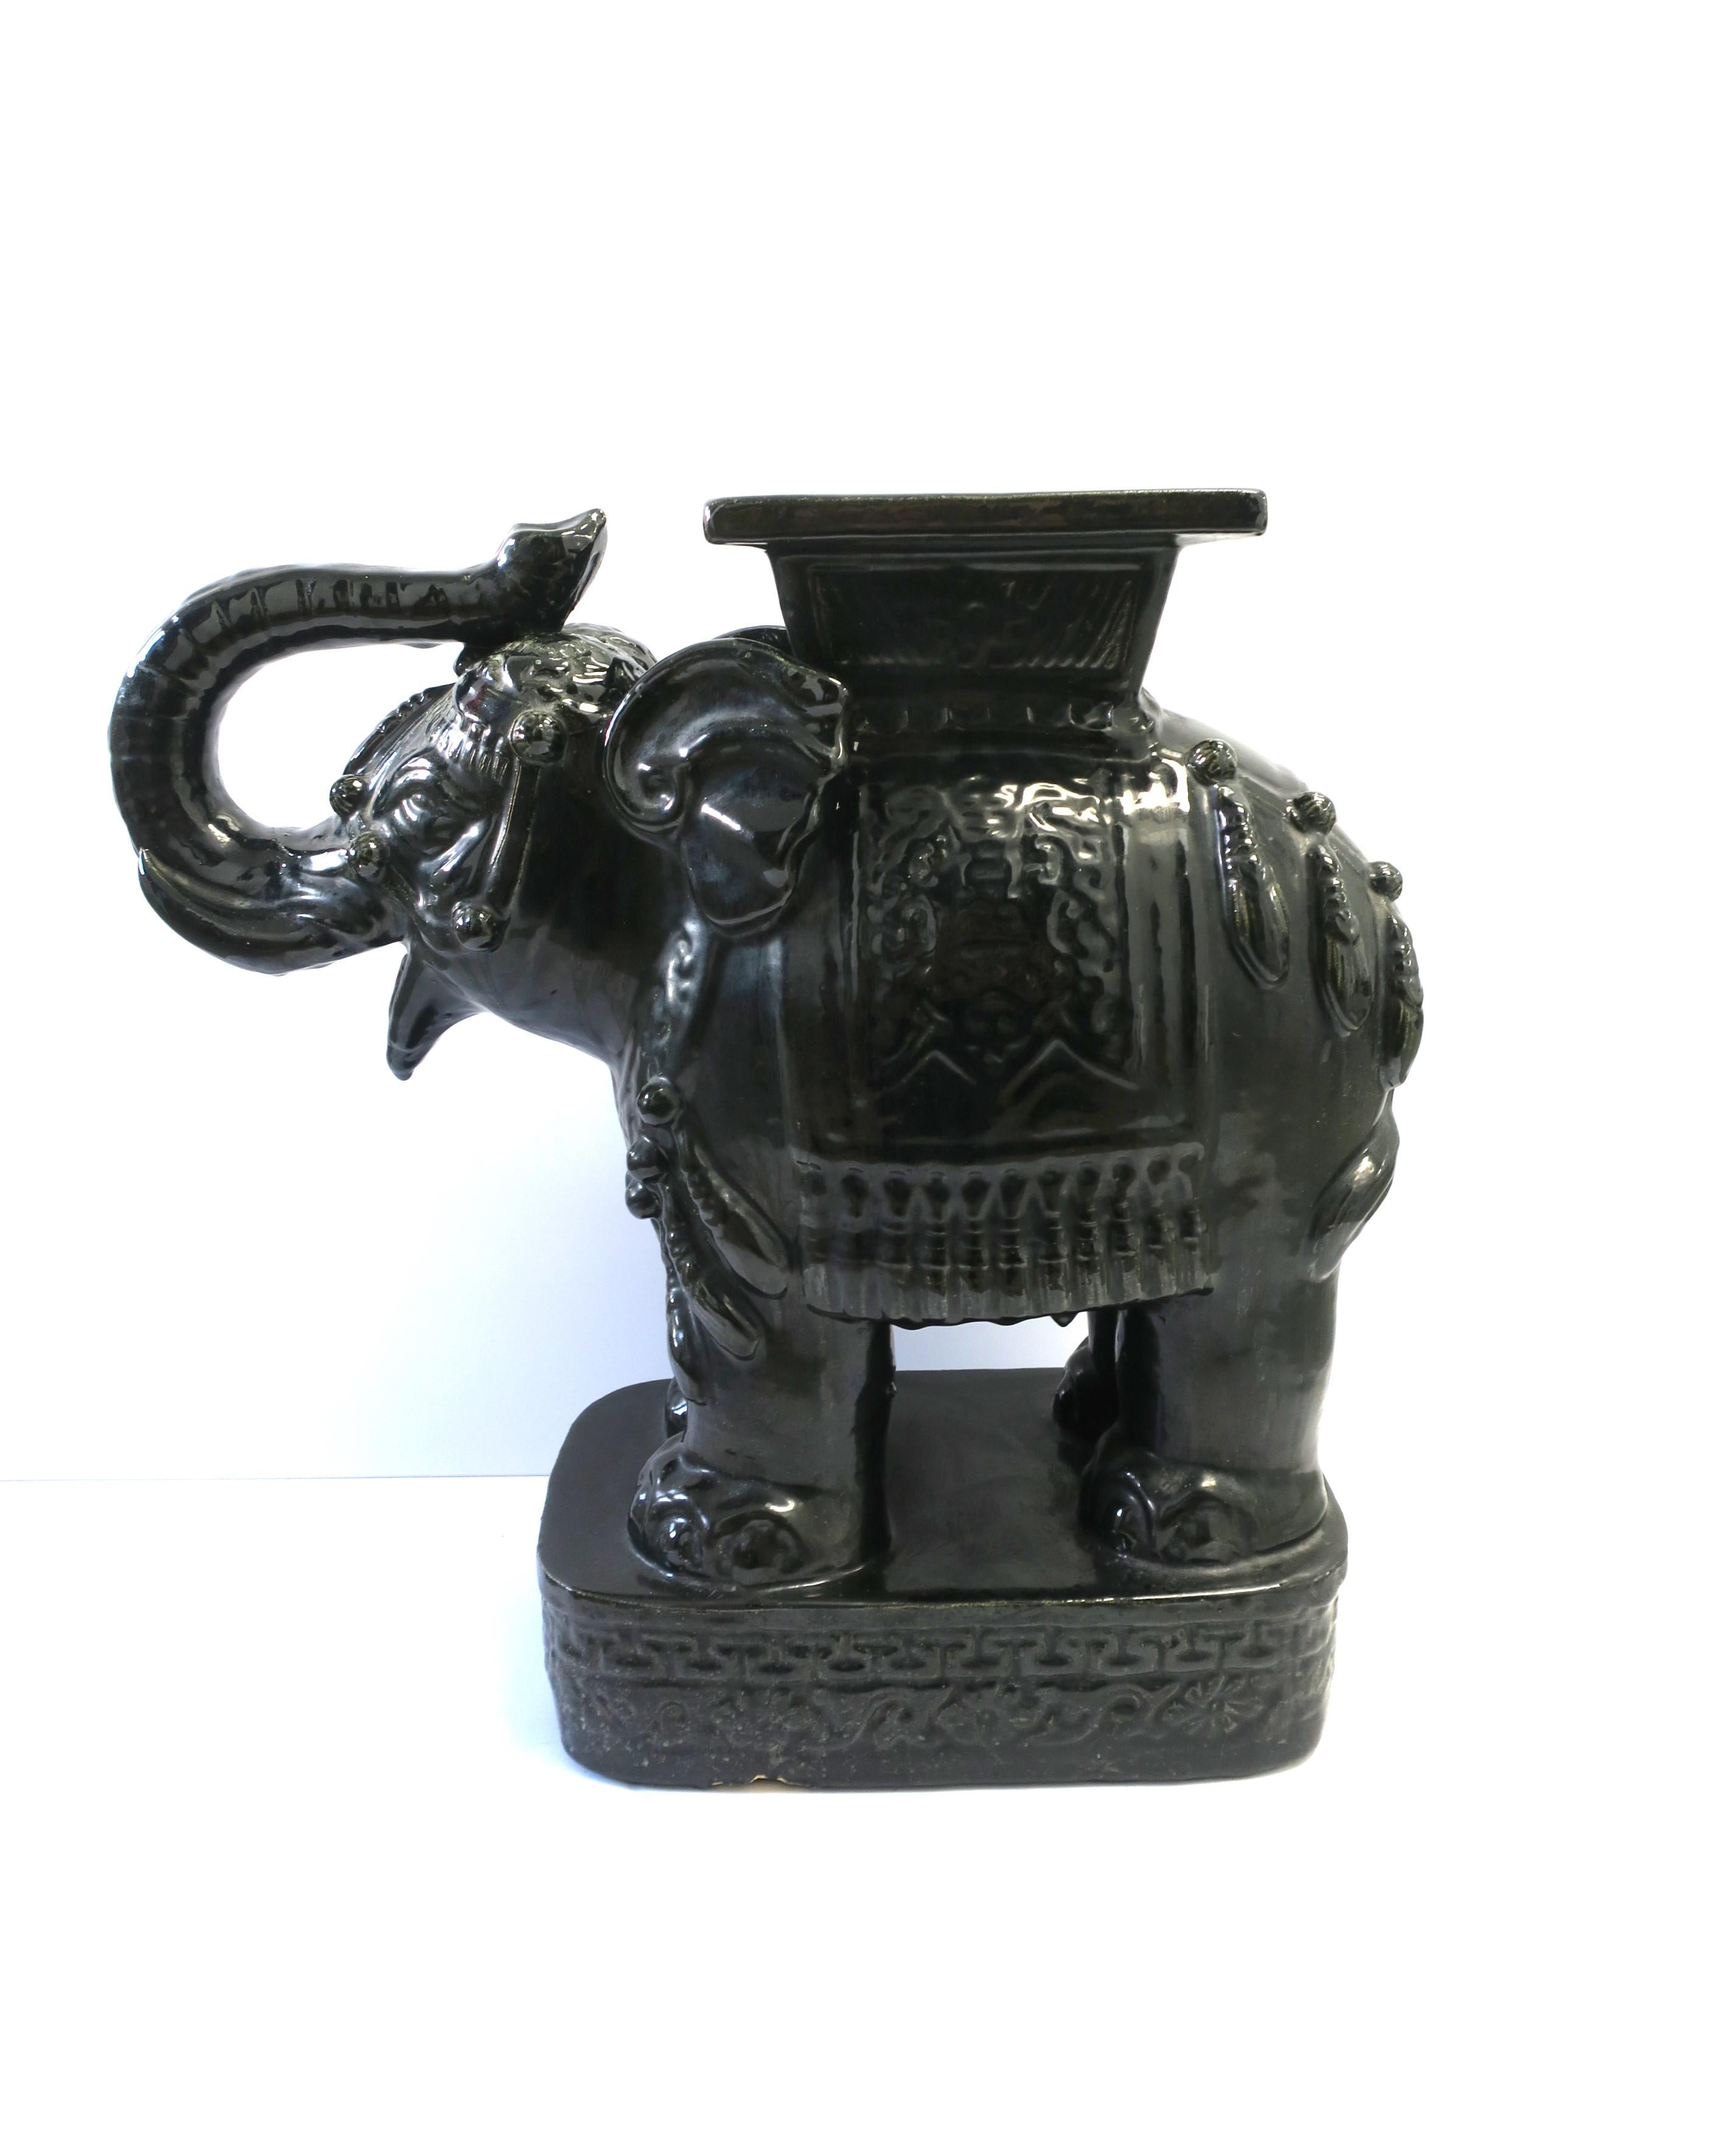 An Italian black glazed ceramic elephant in the Hollywood Regency style, circa mid-20th century, Italy. This all-black ceramic Elephant (with trunk up for good luck) could make a great end table/stand-alone-piece, side/drink table, plant or